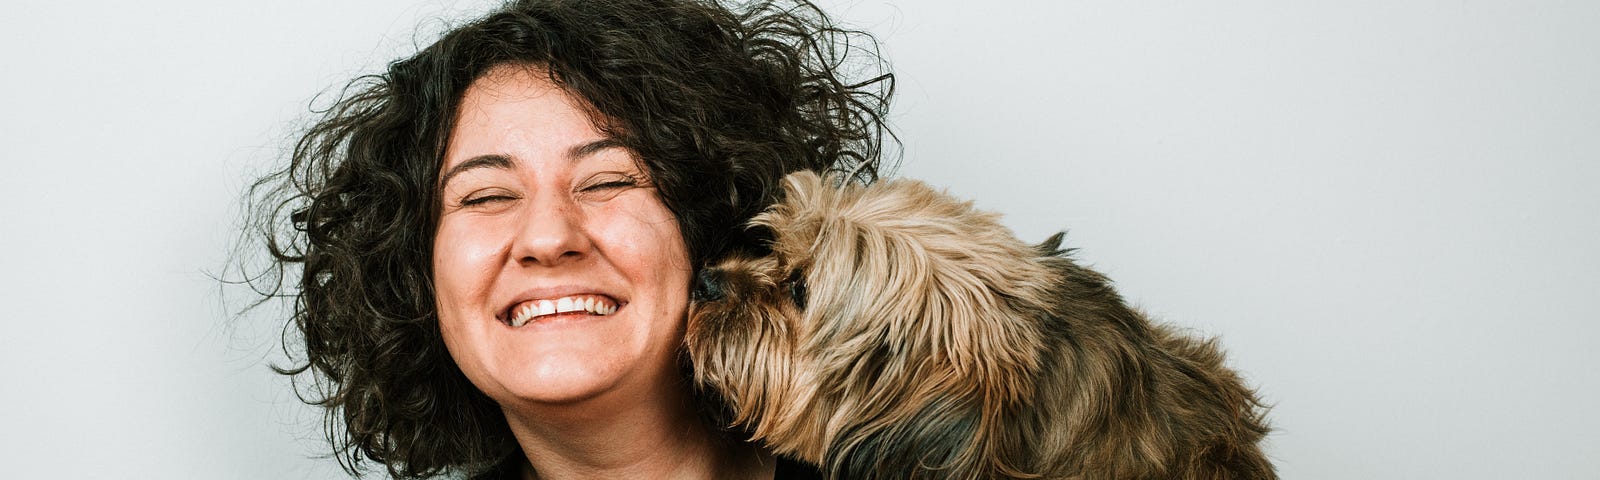 A woman smiling as she holds a dog close, the dog licking at her face.